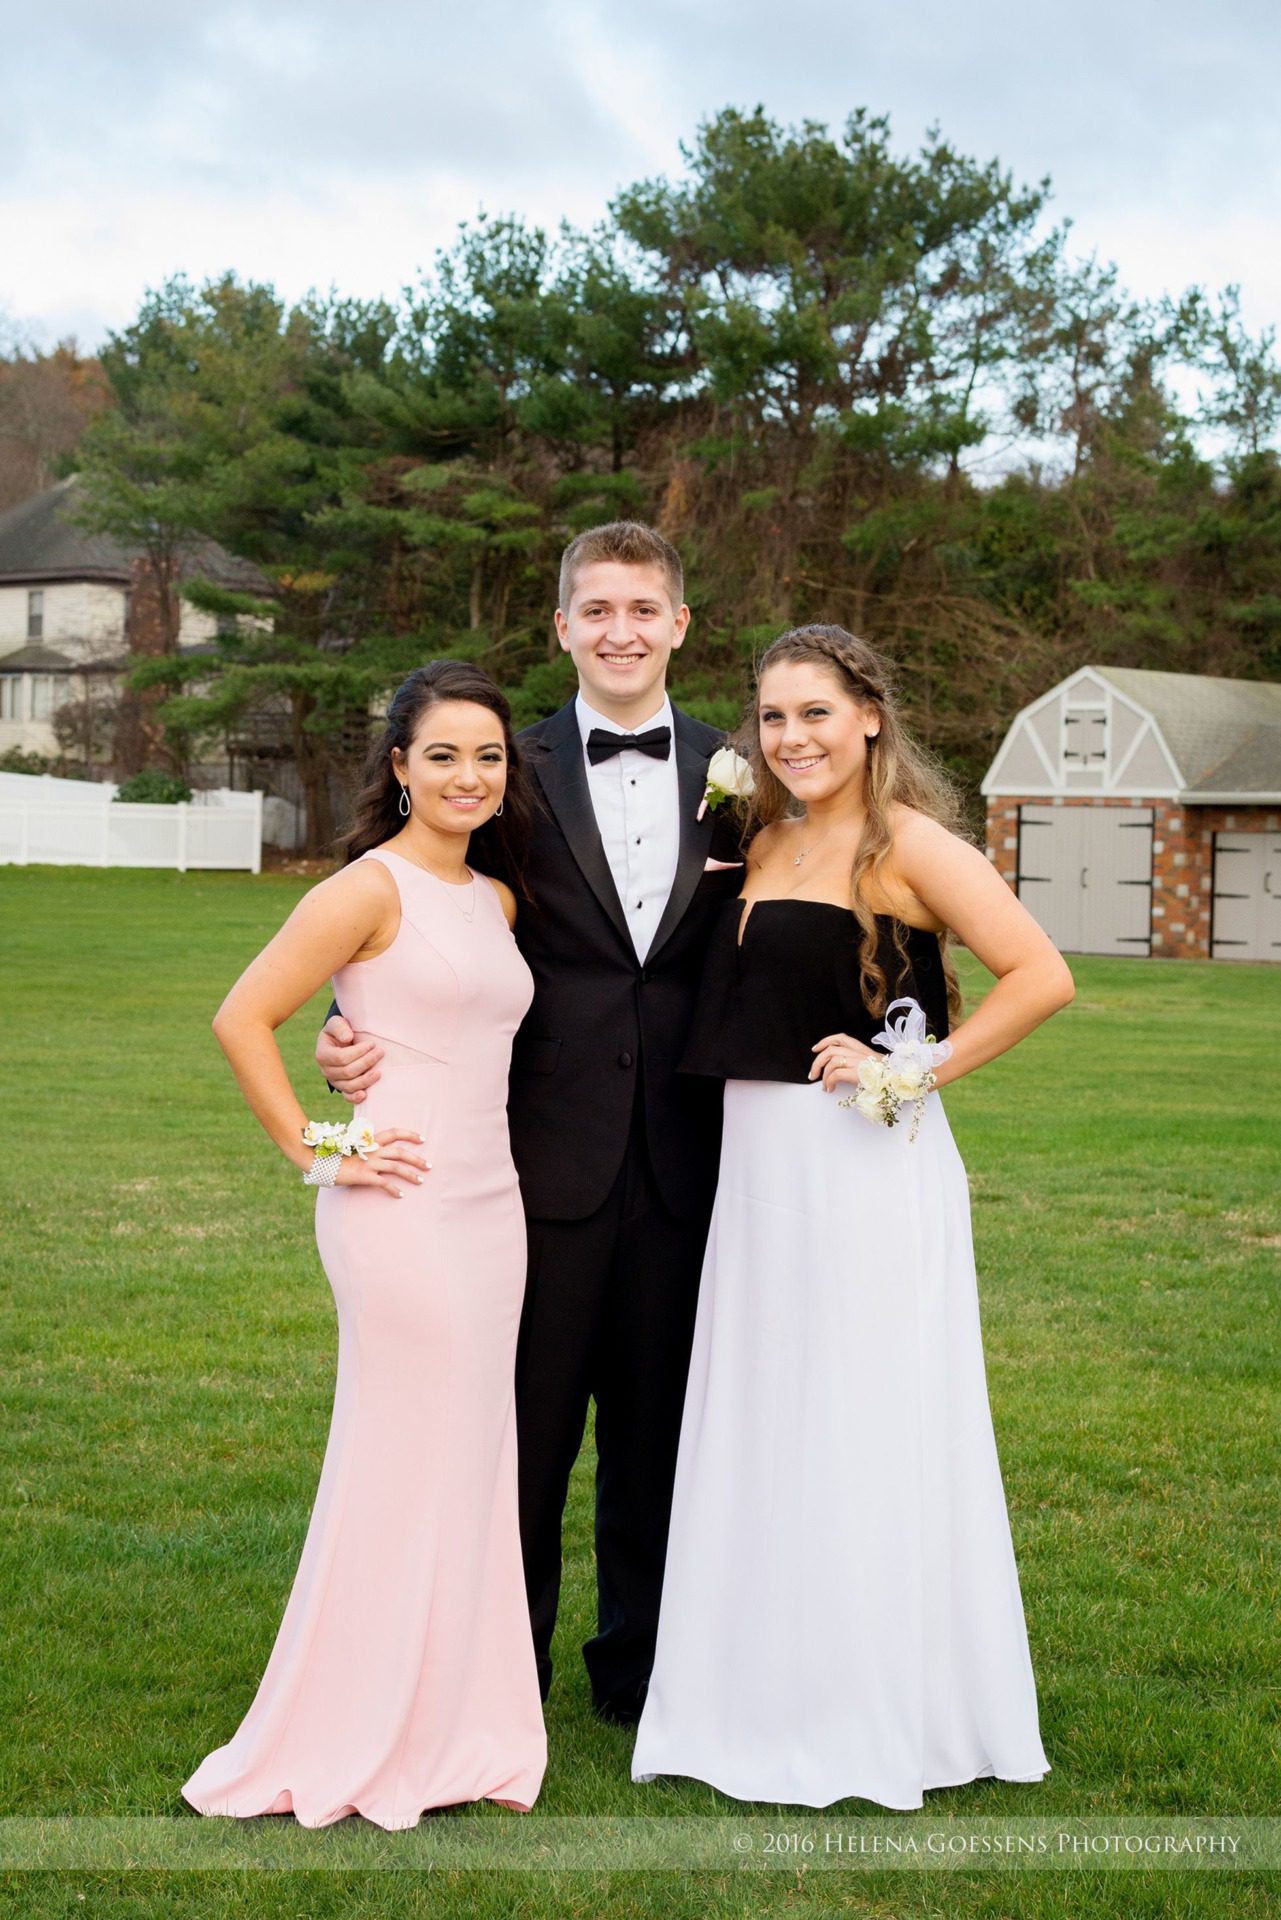 A boy and two girls wearing prom dresses and a tuxedo